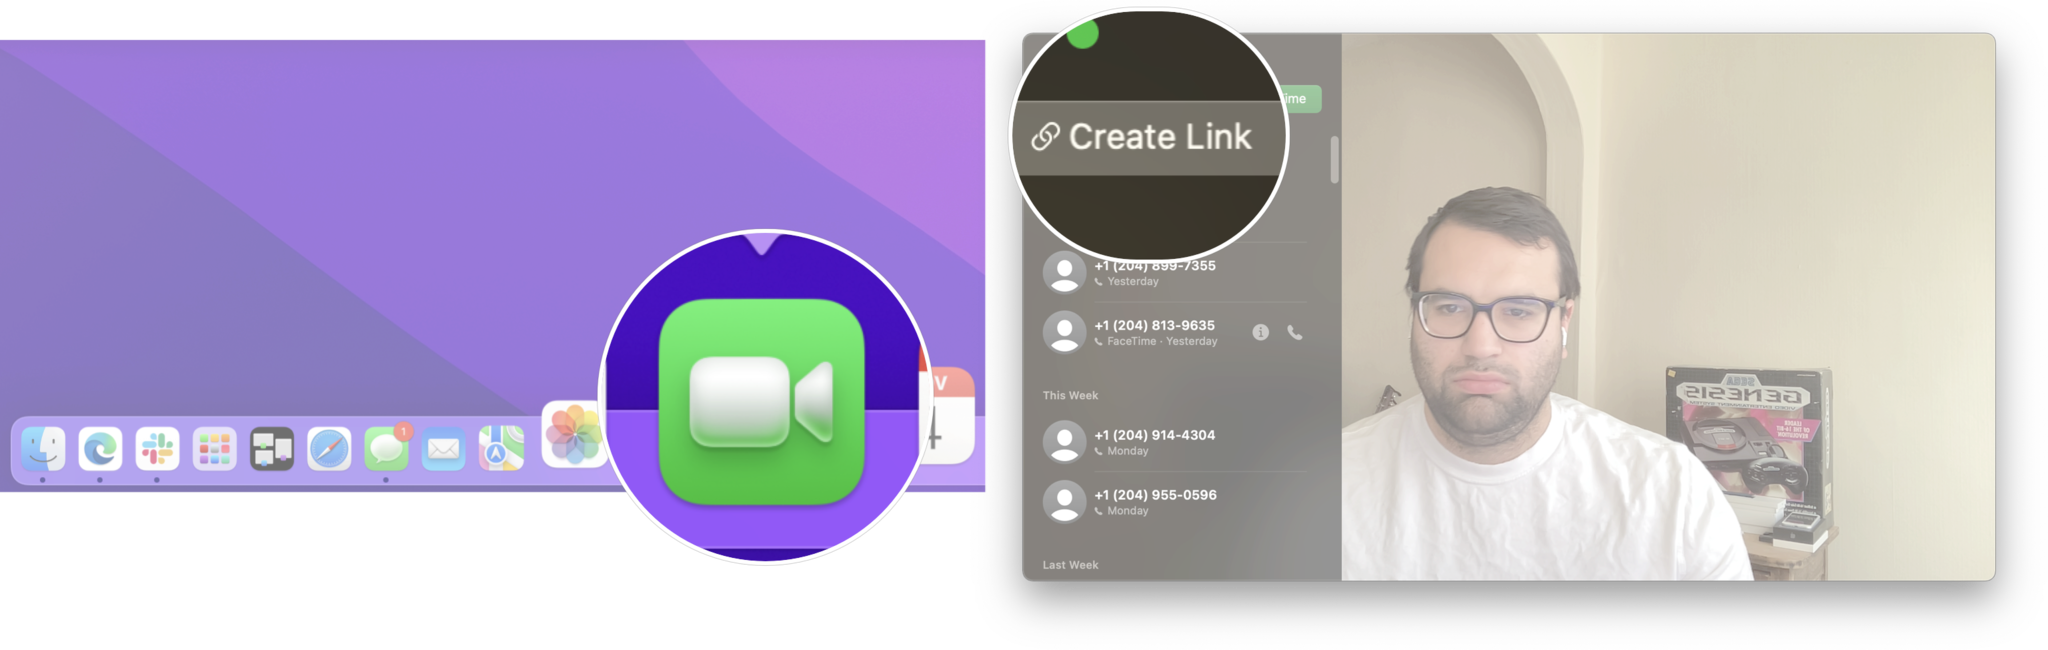 Creating FaceTime Link In macOS Monterey: Launch faceTime and then click create link. 